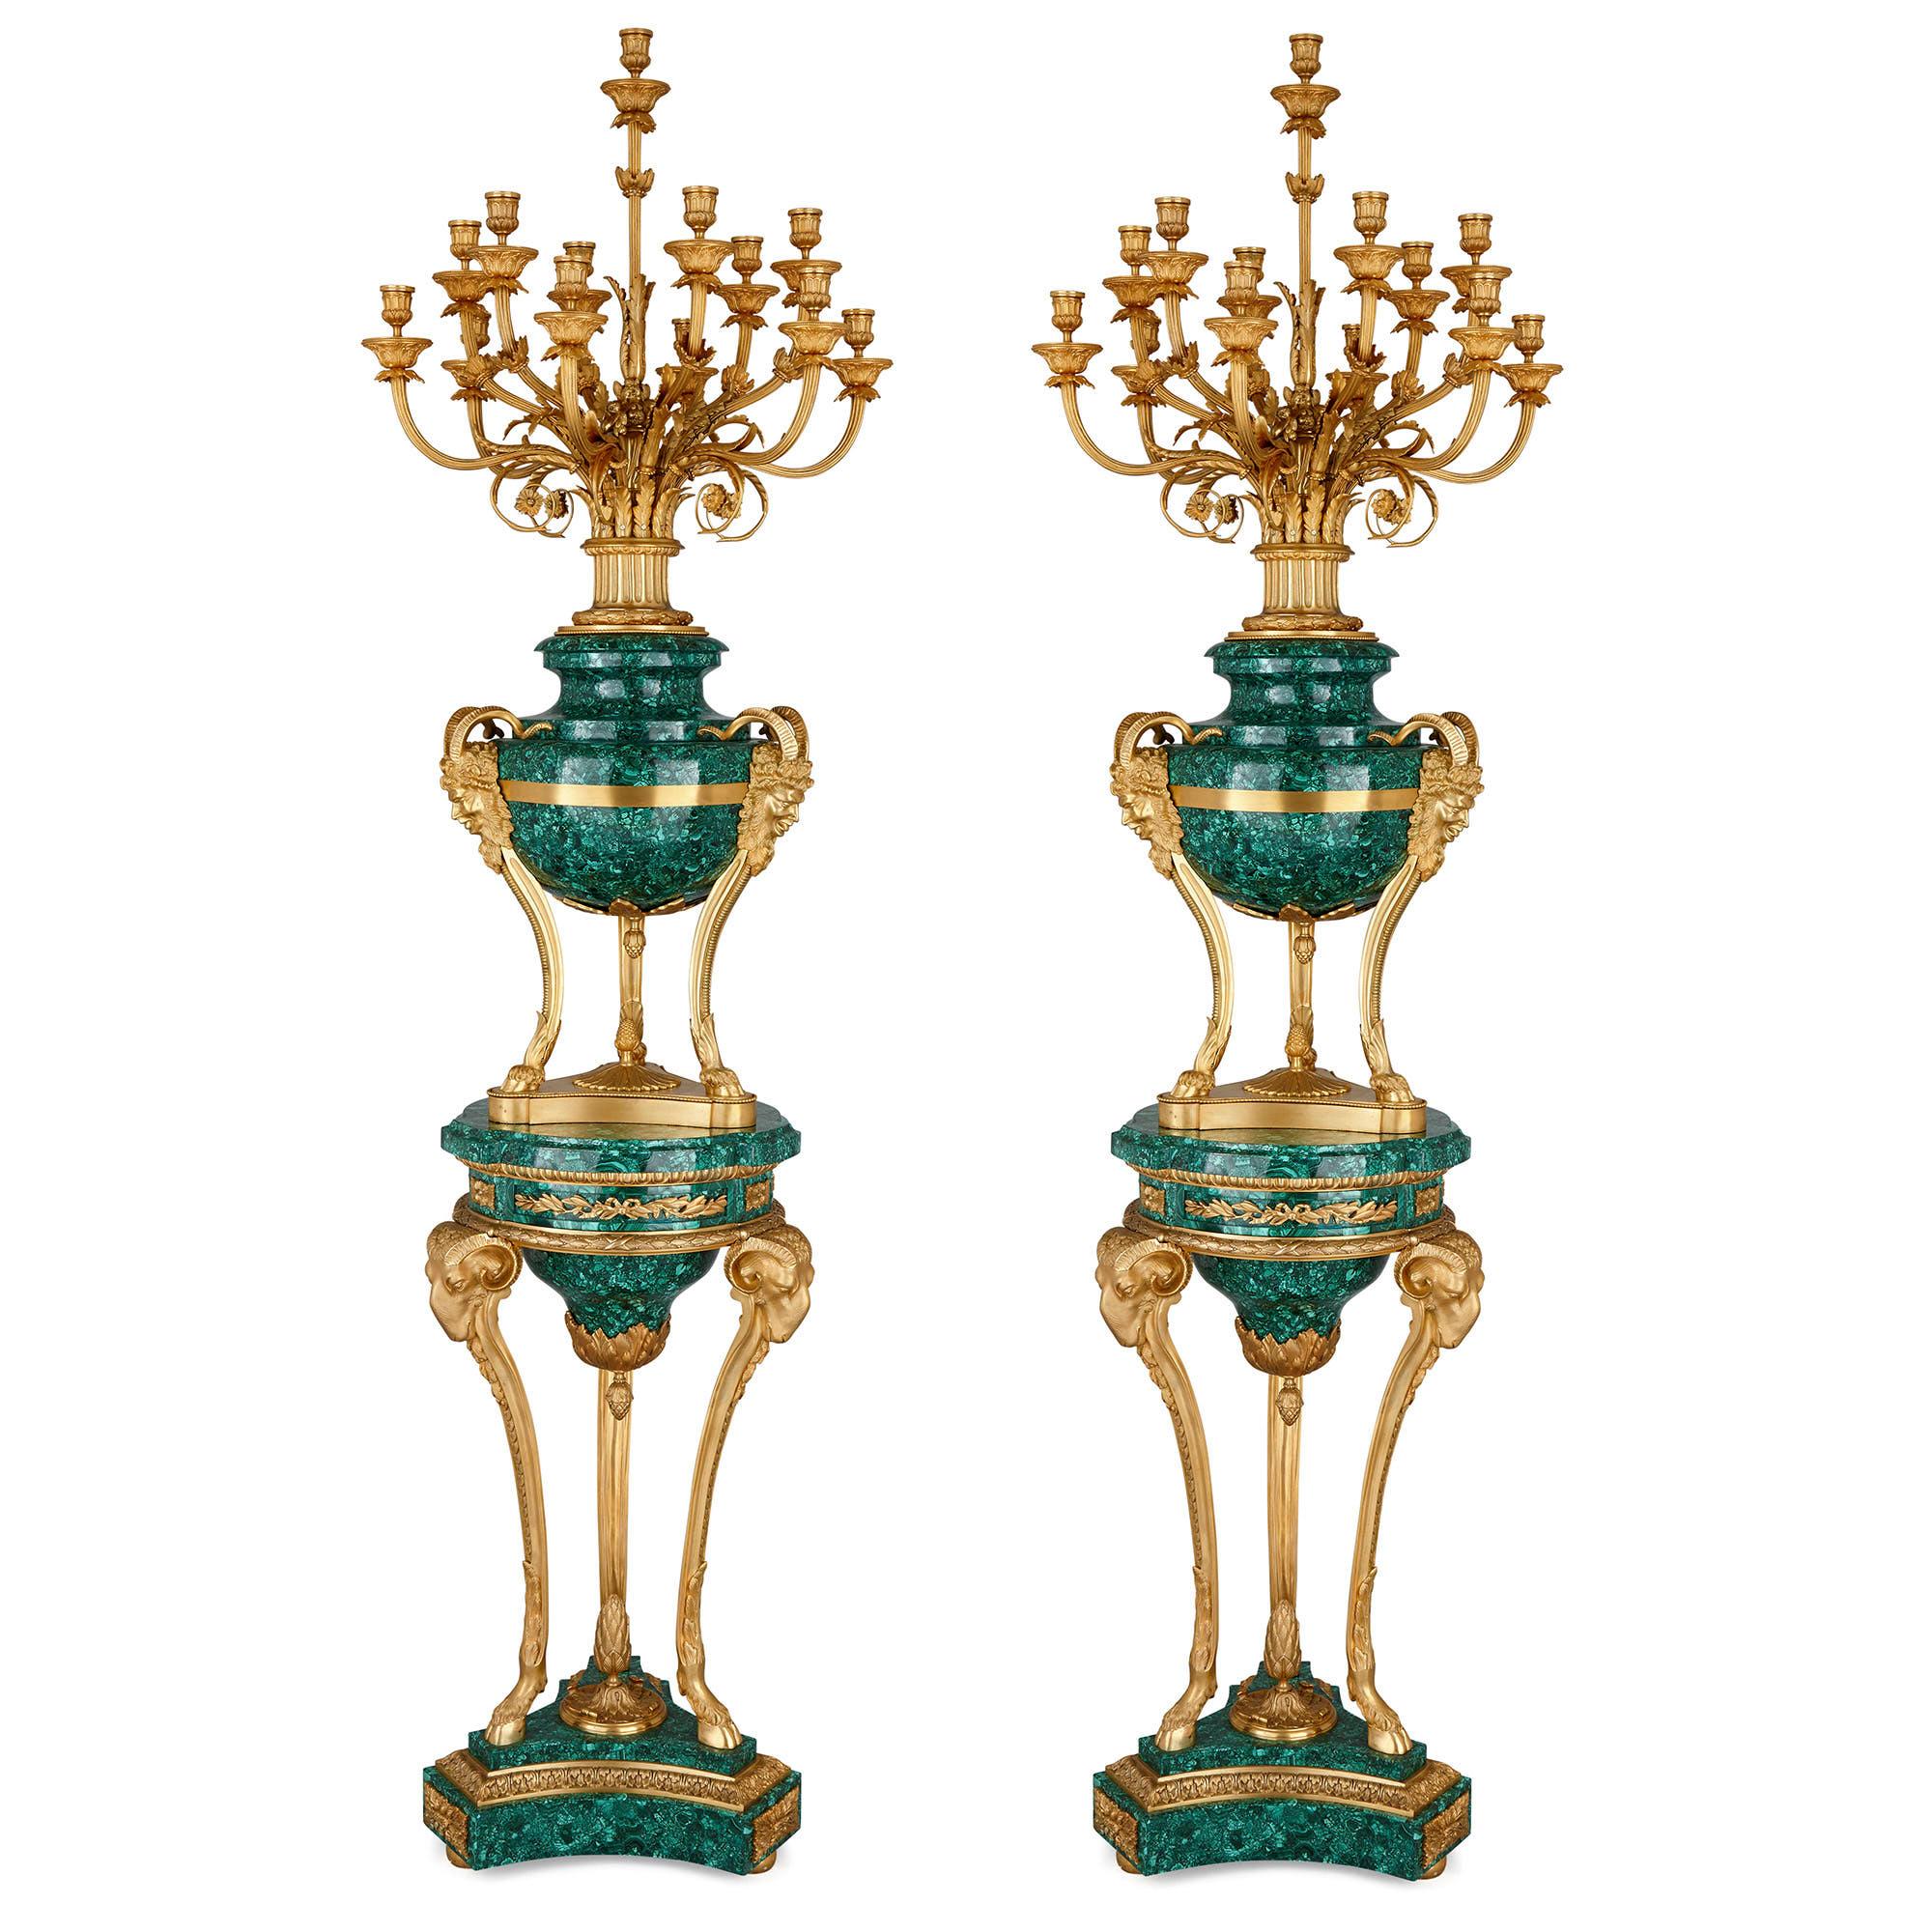 Pair of Large Gilt Bronze and Malachite Neoclassical Style Candelabra For Sale 1